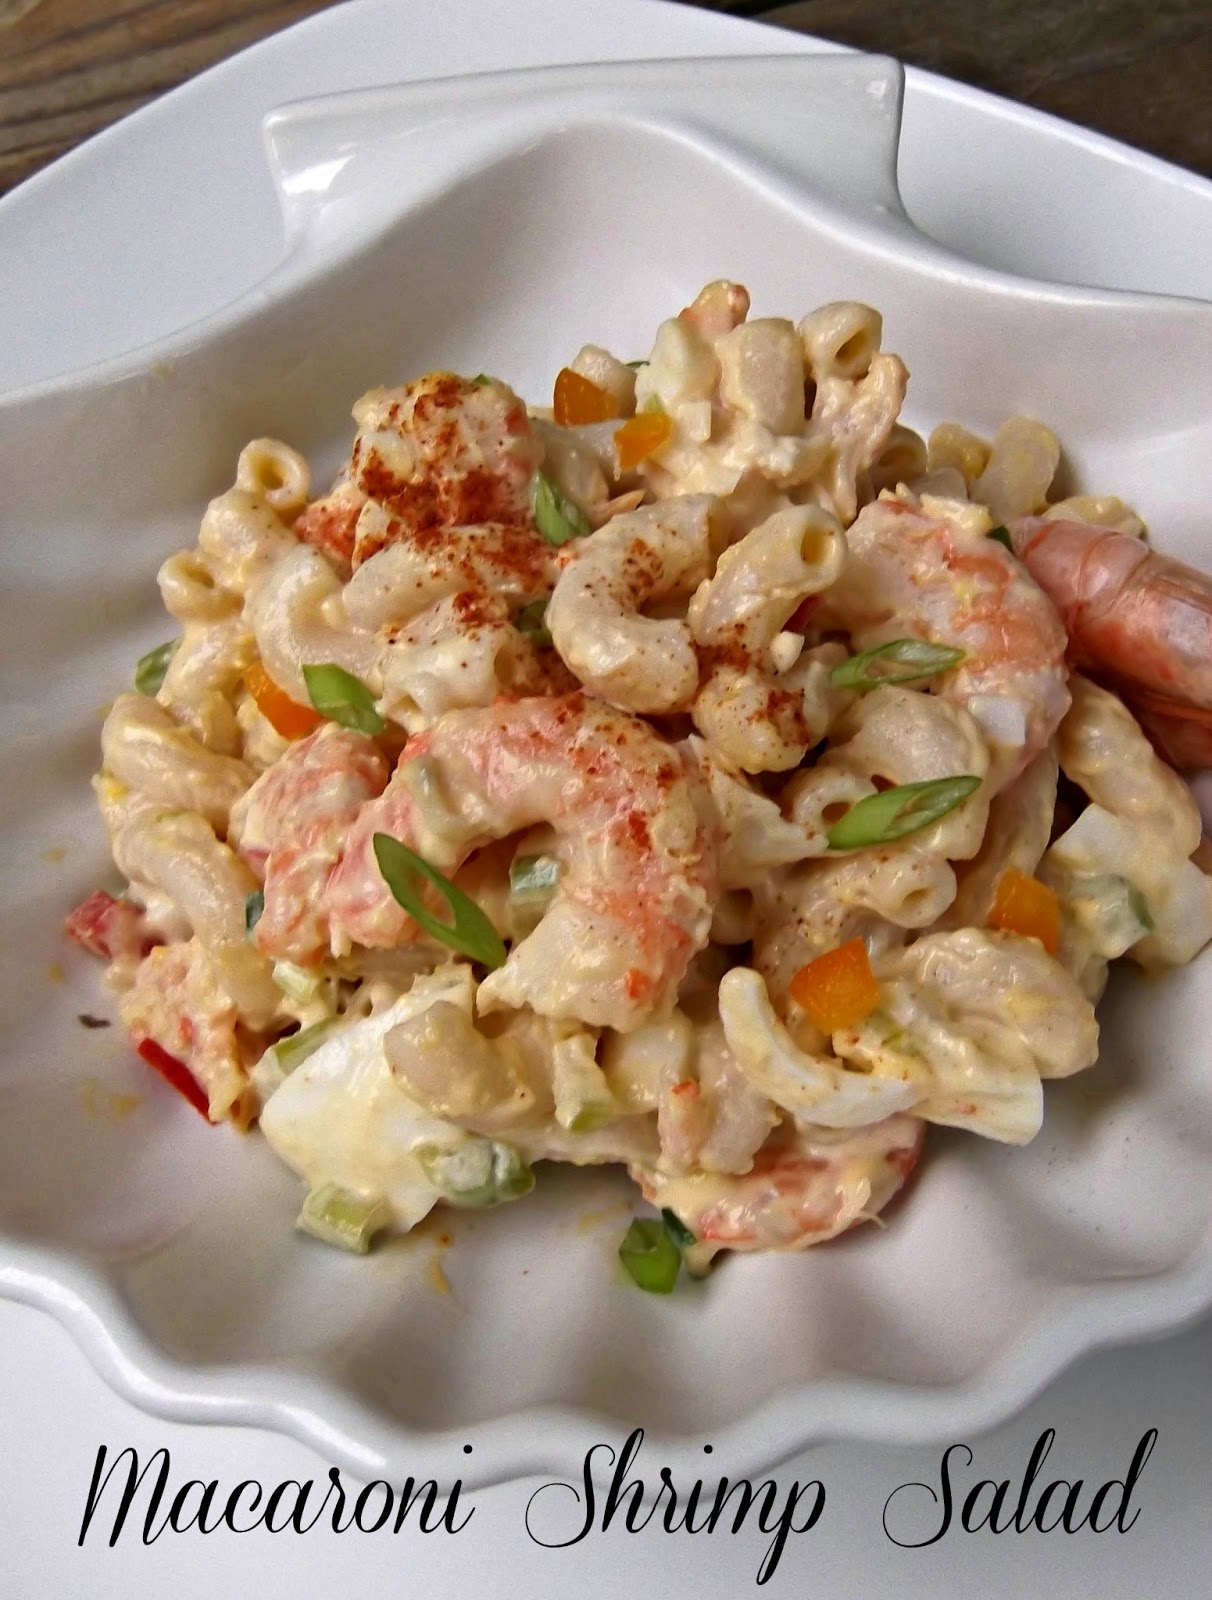 What's For Supper?: Macaroni Shrimp Salad